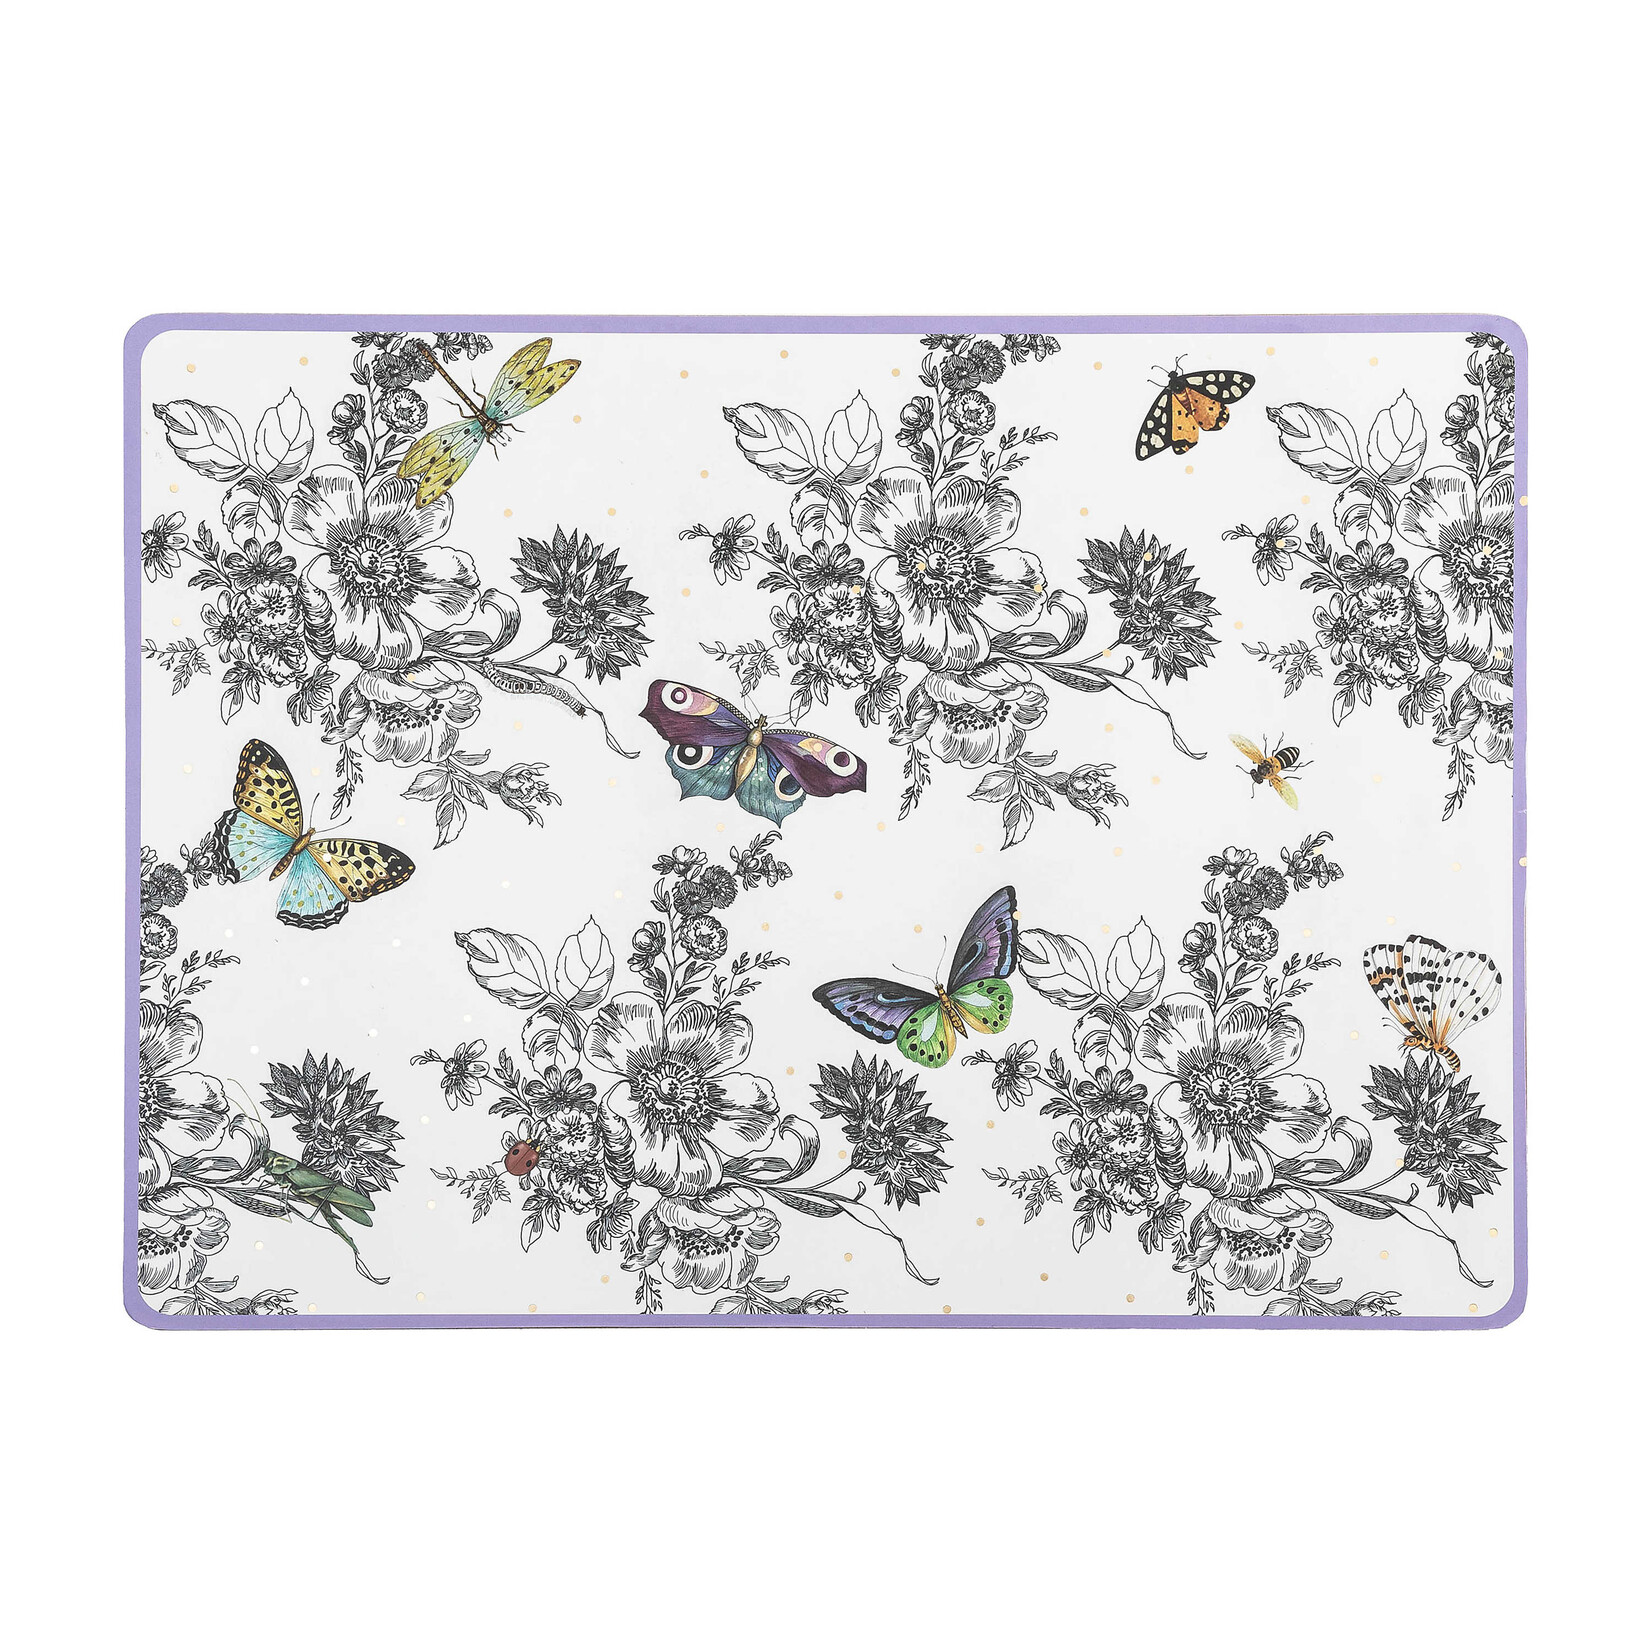 MacKenzie-Childs butterfly toile cork back placemats - set of 4